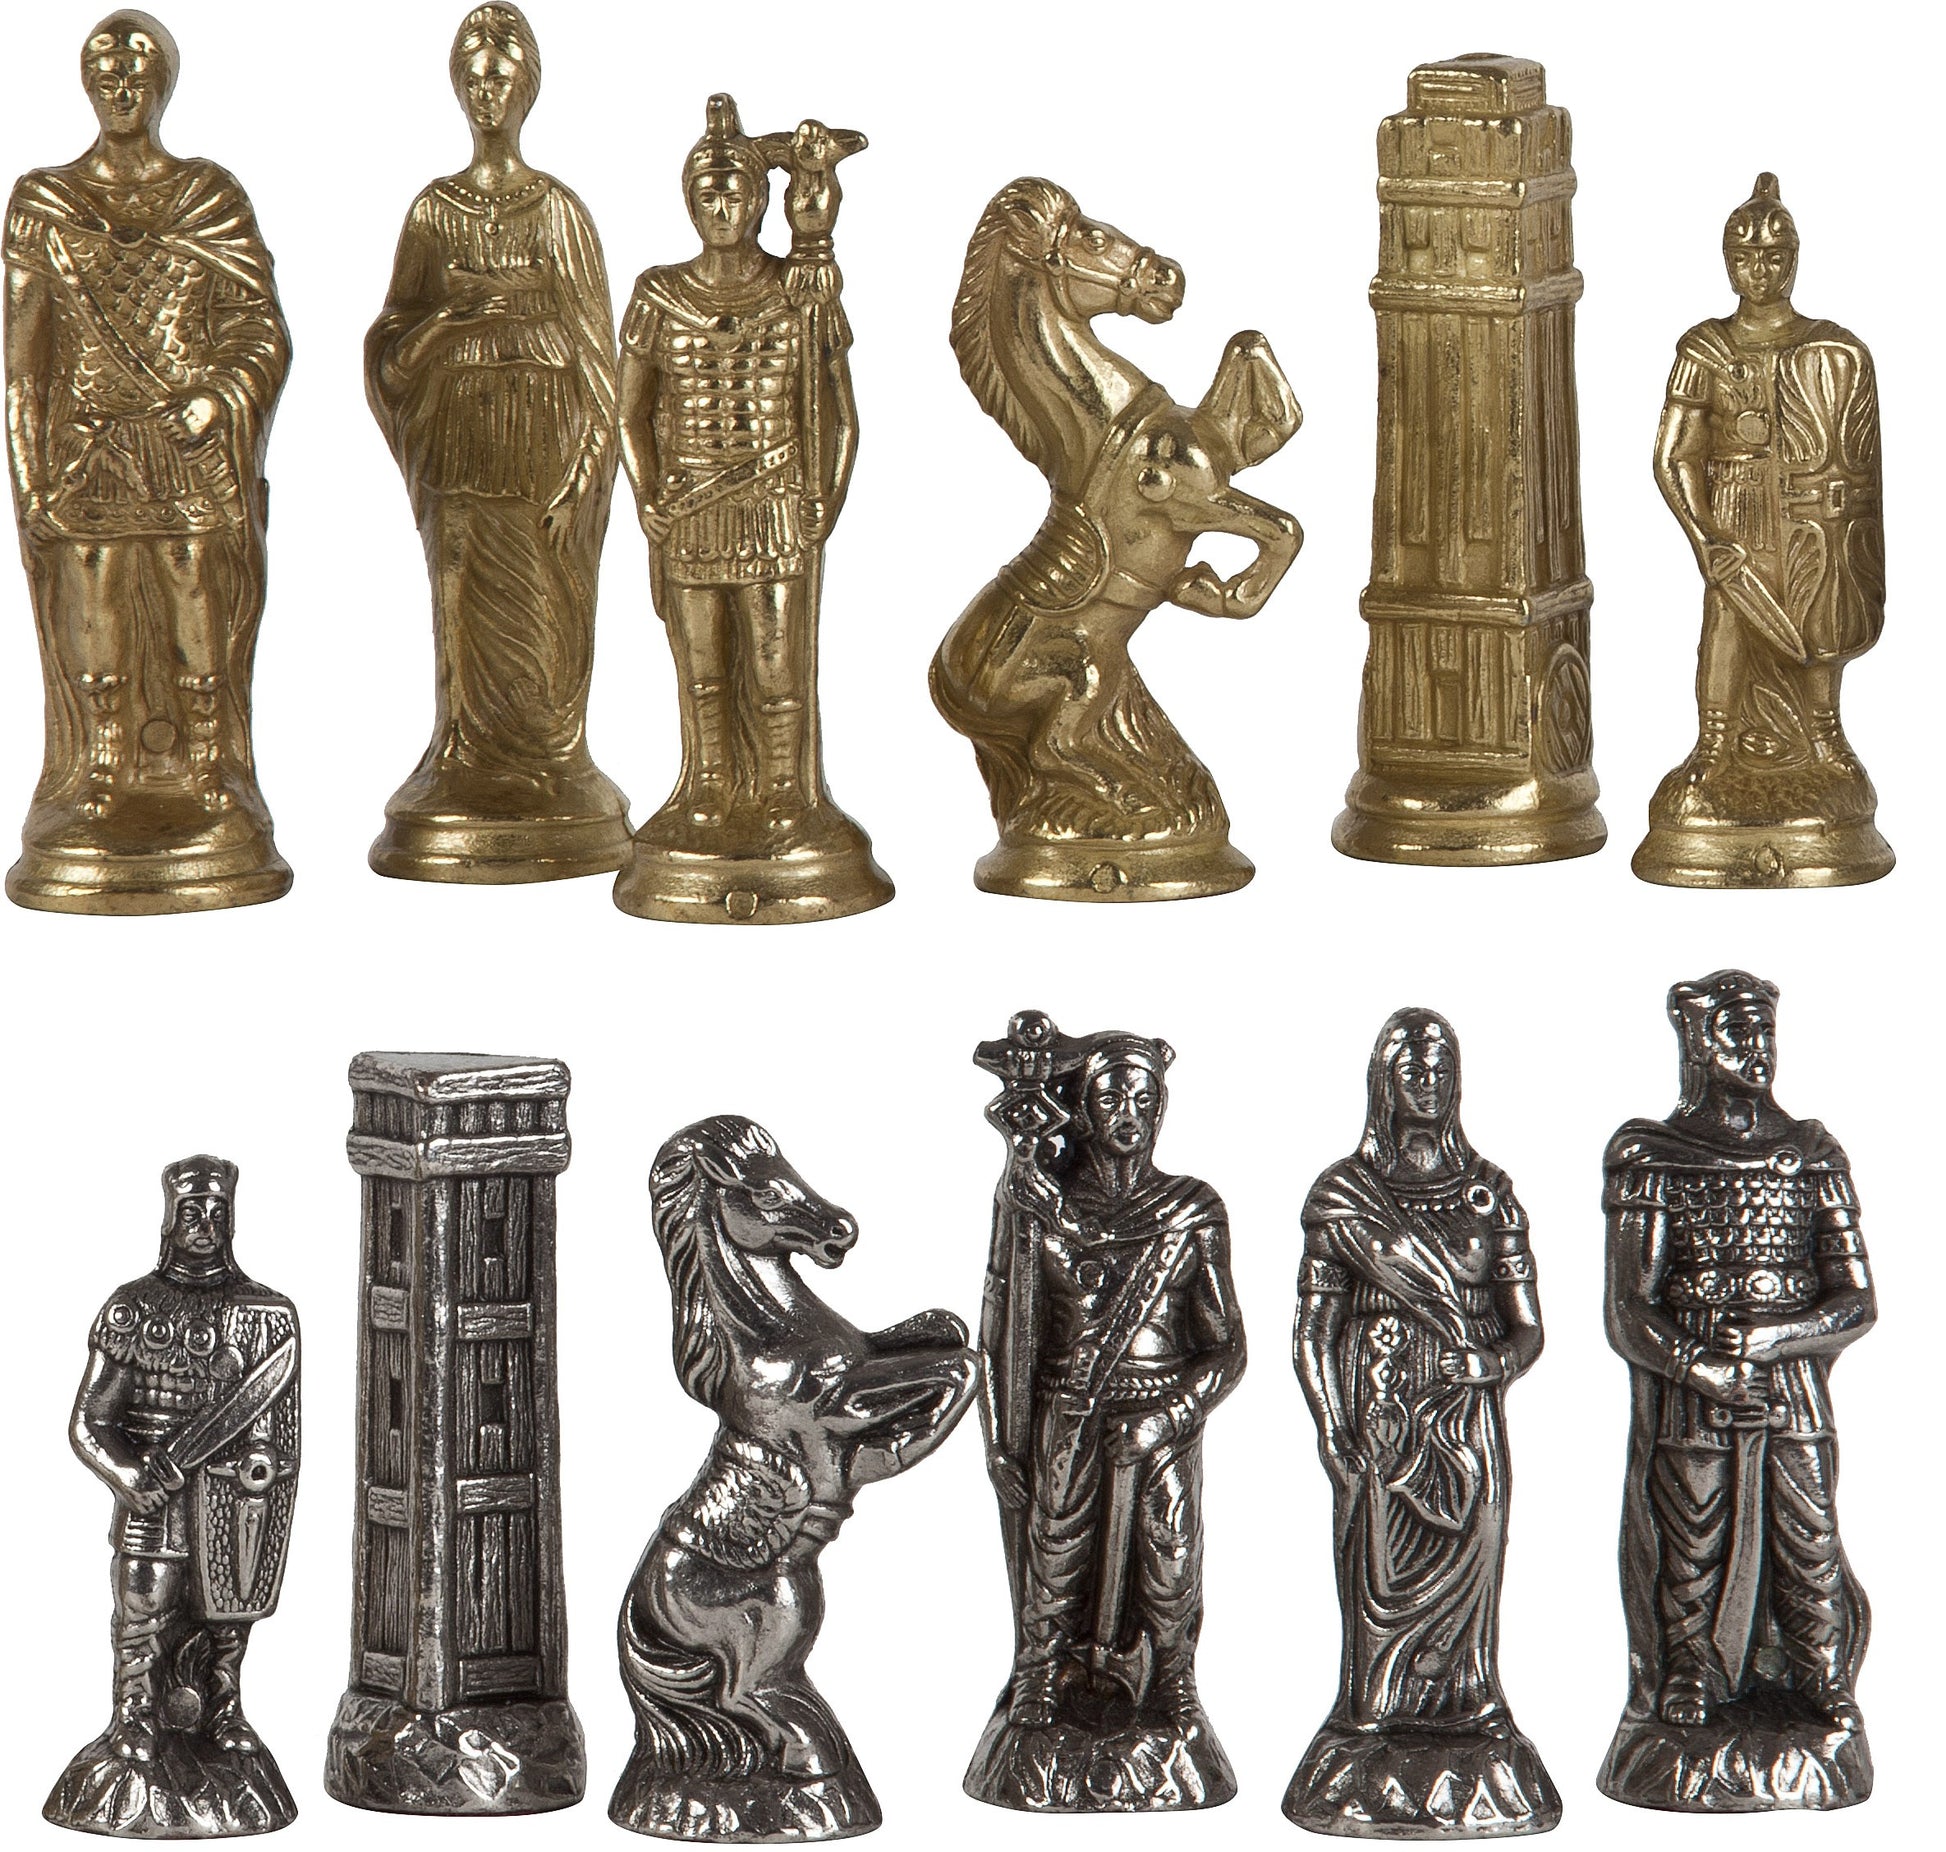 Silver-plated Brass Romans vs Barbarians Themed Chessmen